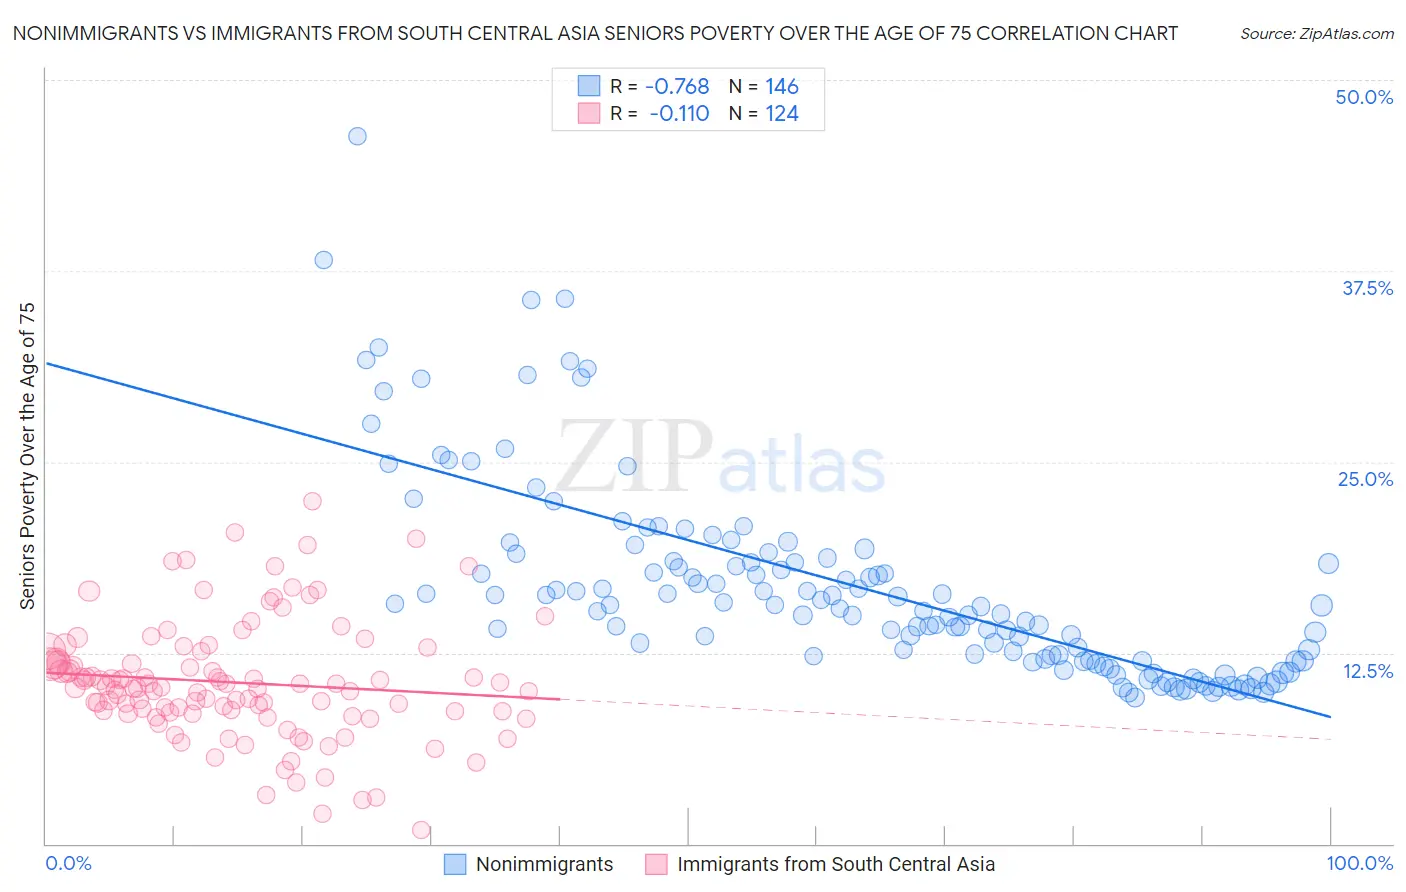 Nonimmigrants vs Immigrants from South Central Asia Seniors Poverty Over the Age of 75